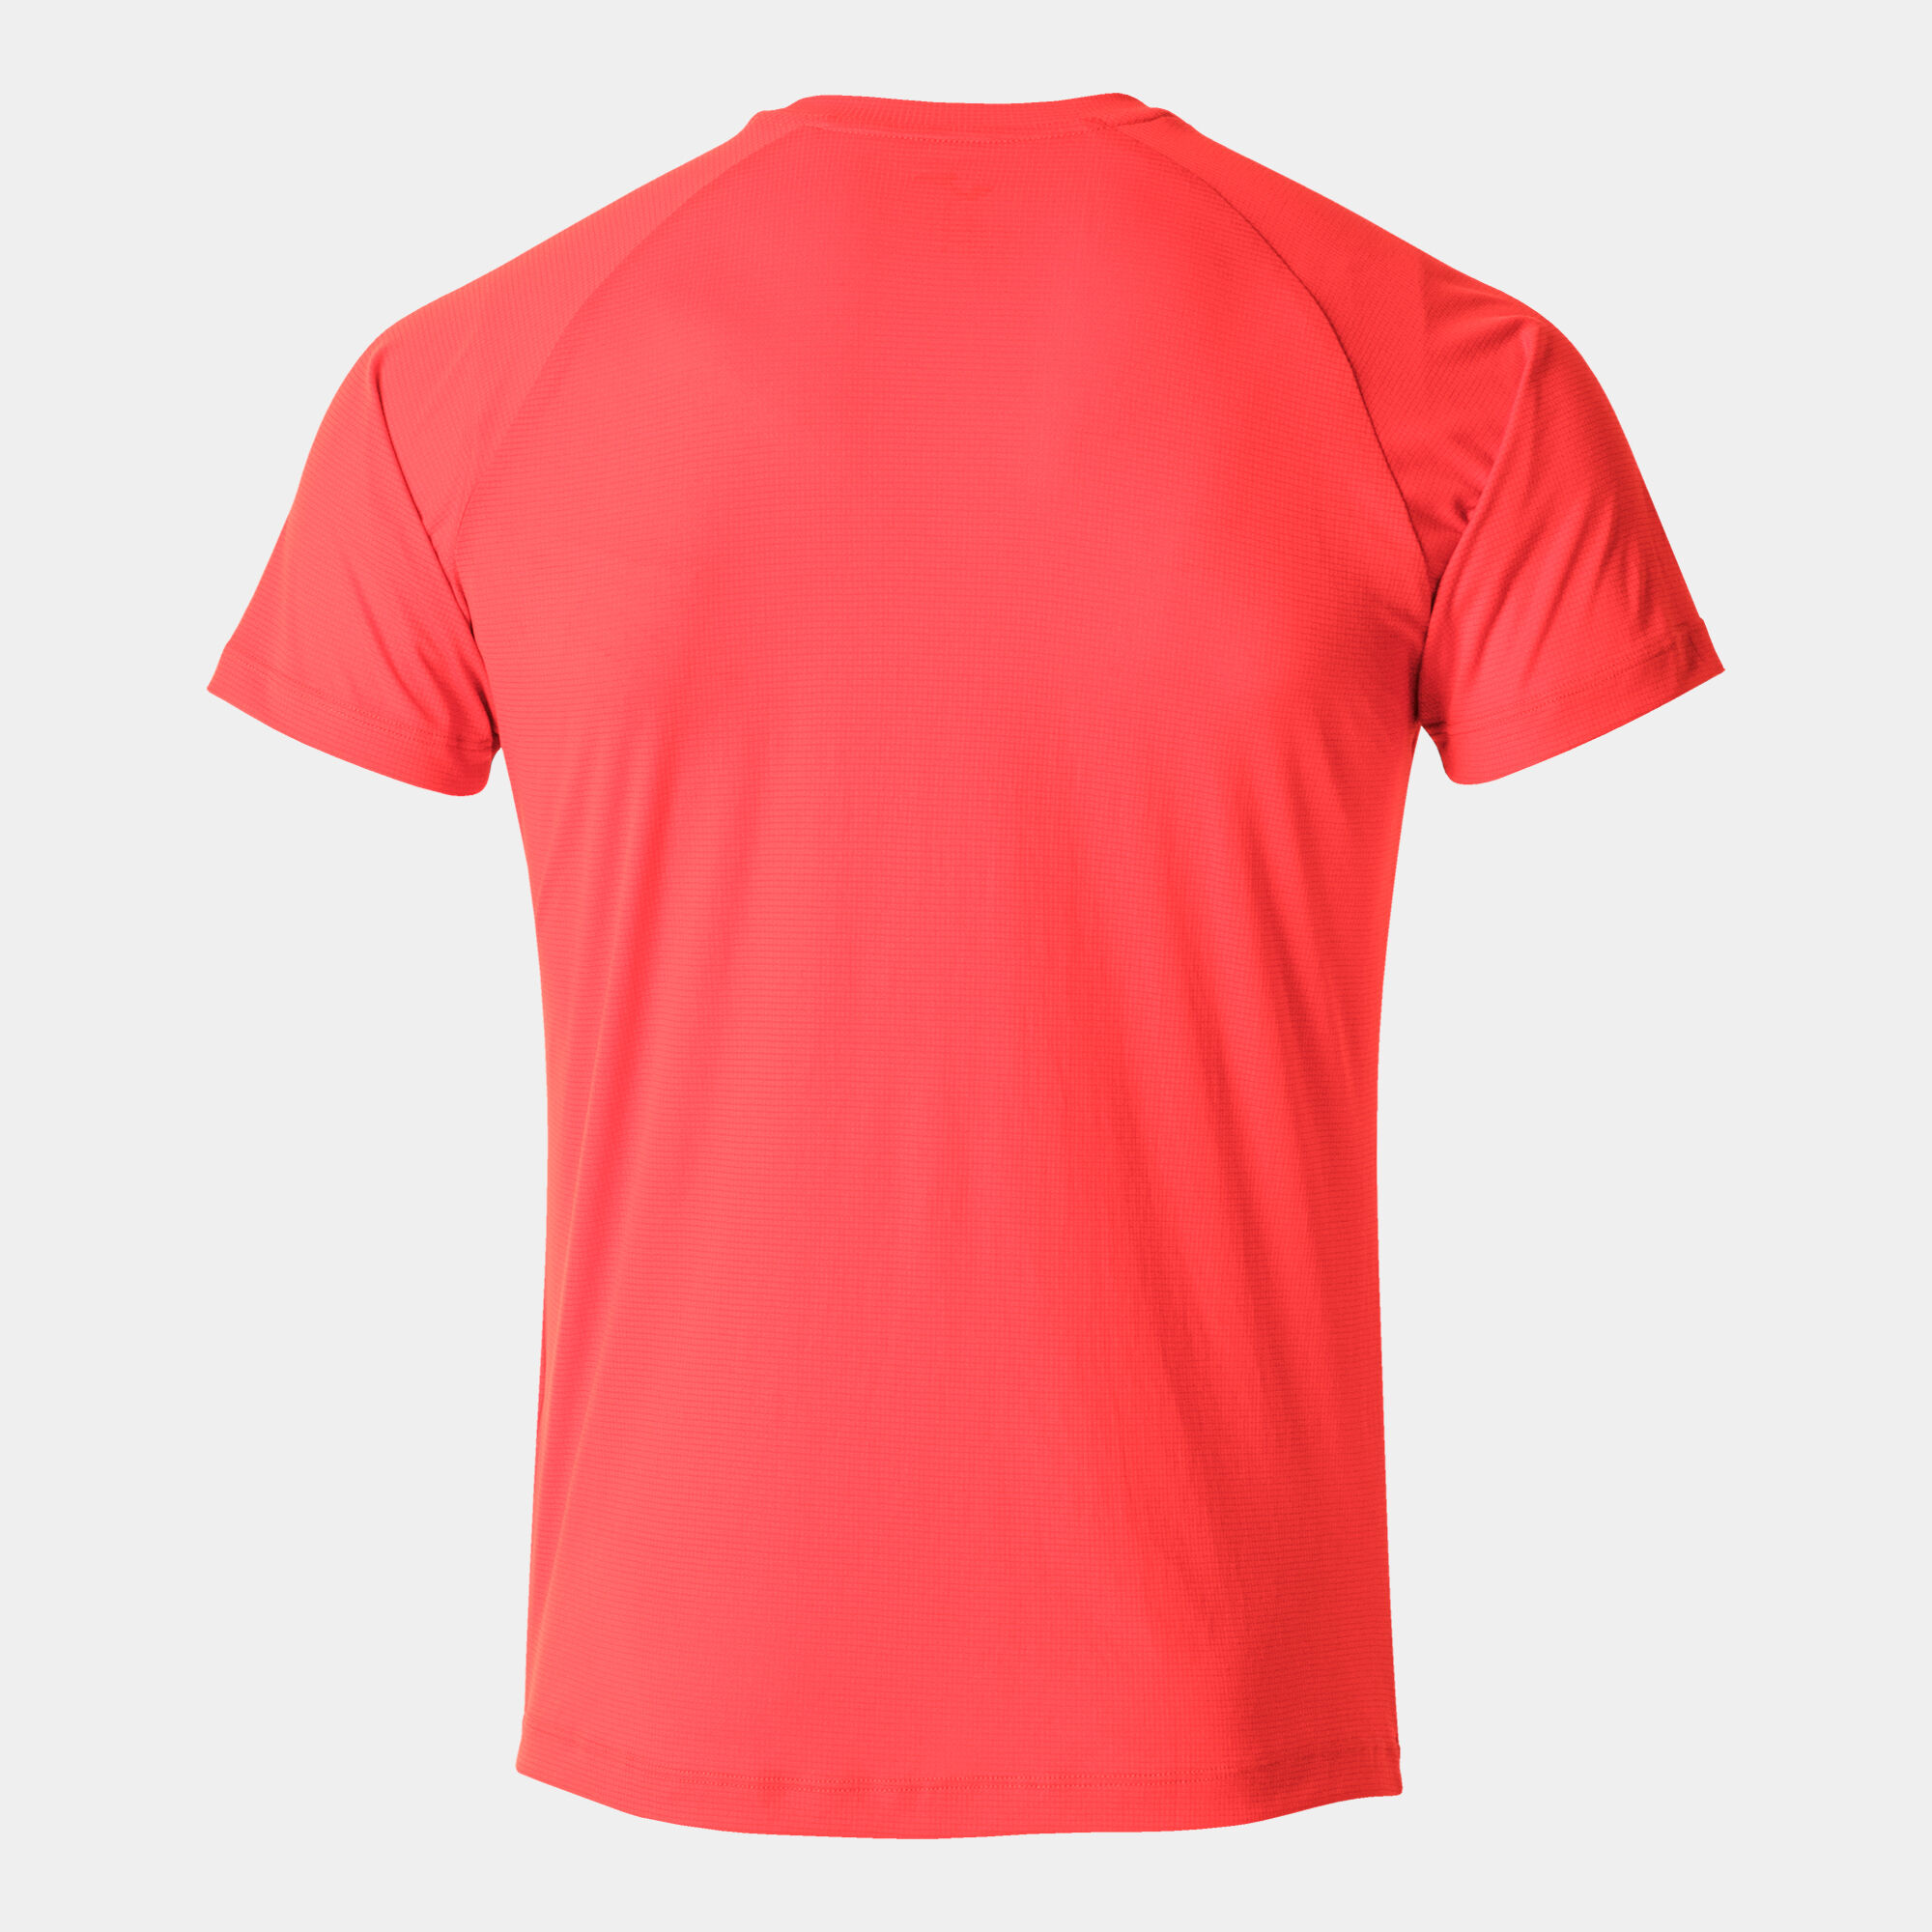 MAILLOT MANCHES COURTES HOMME R-COMBI CORAIL FLUO